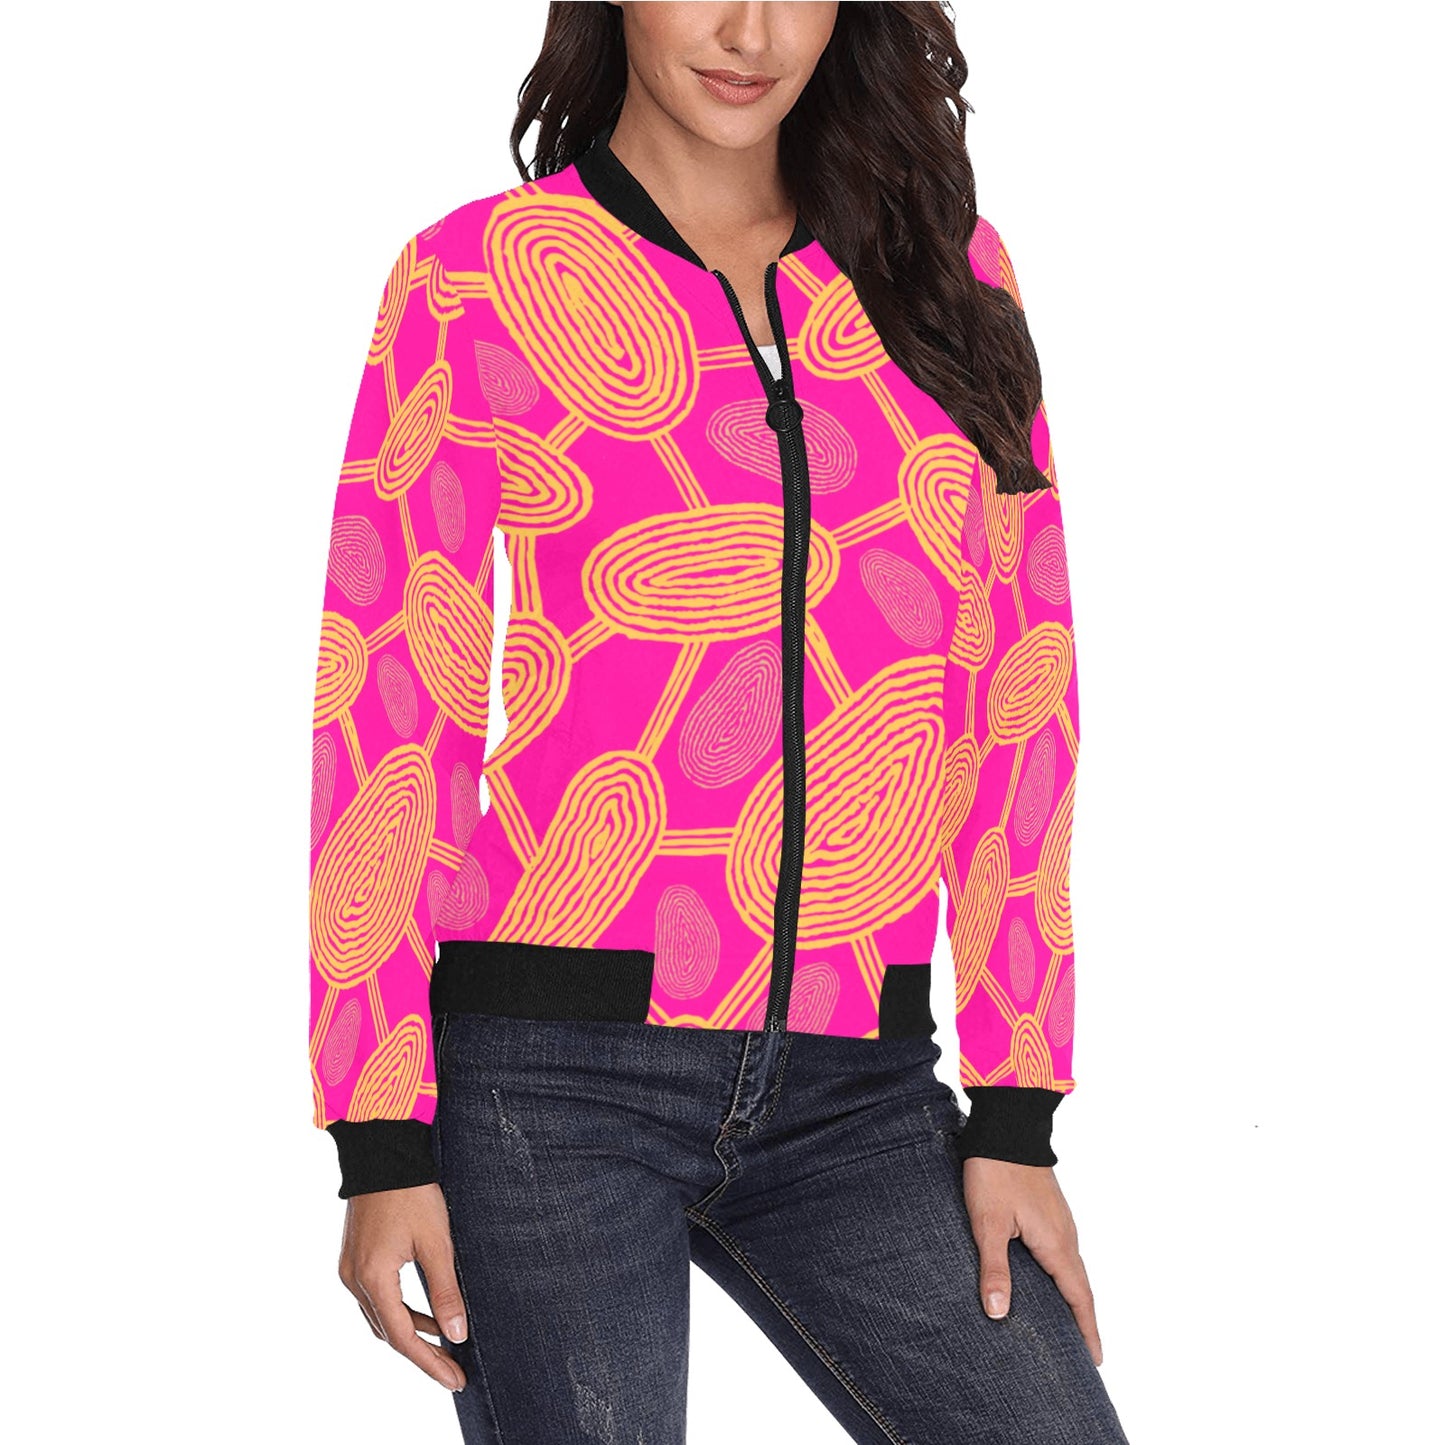 One Eat, we all eat Womens Bomber Jacket by Koori Threads